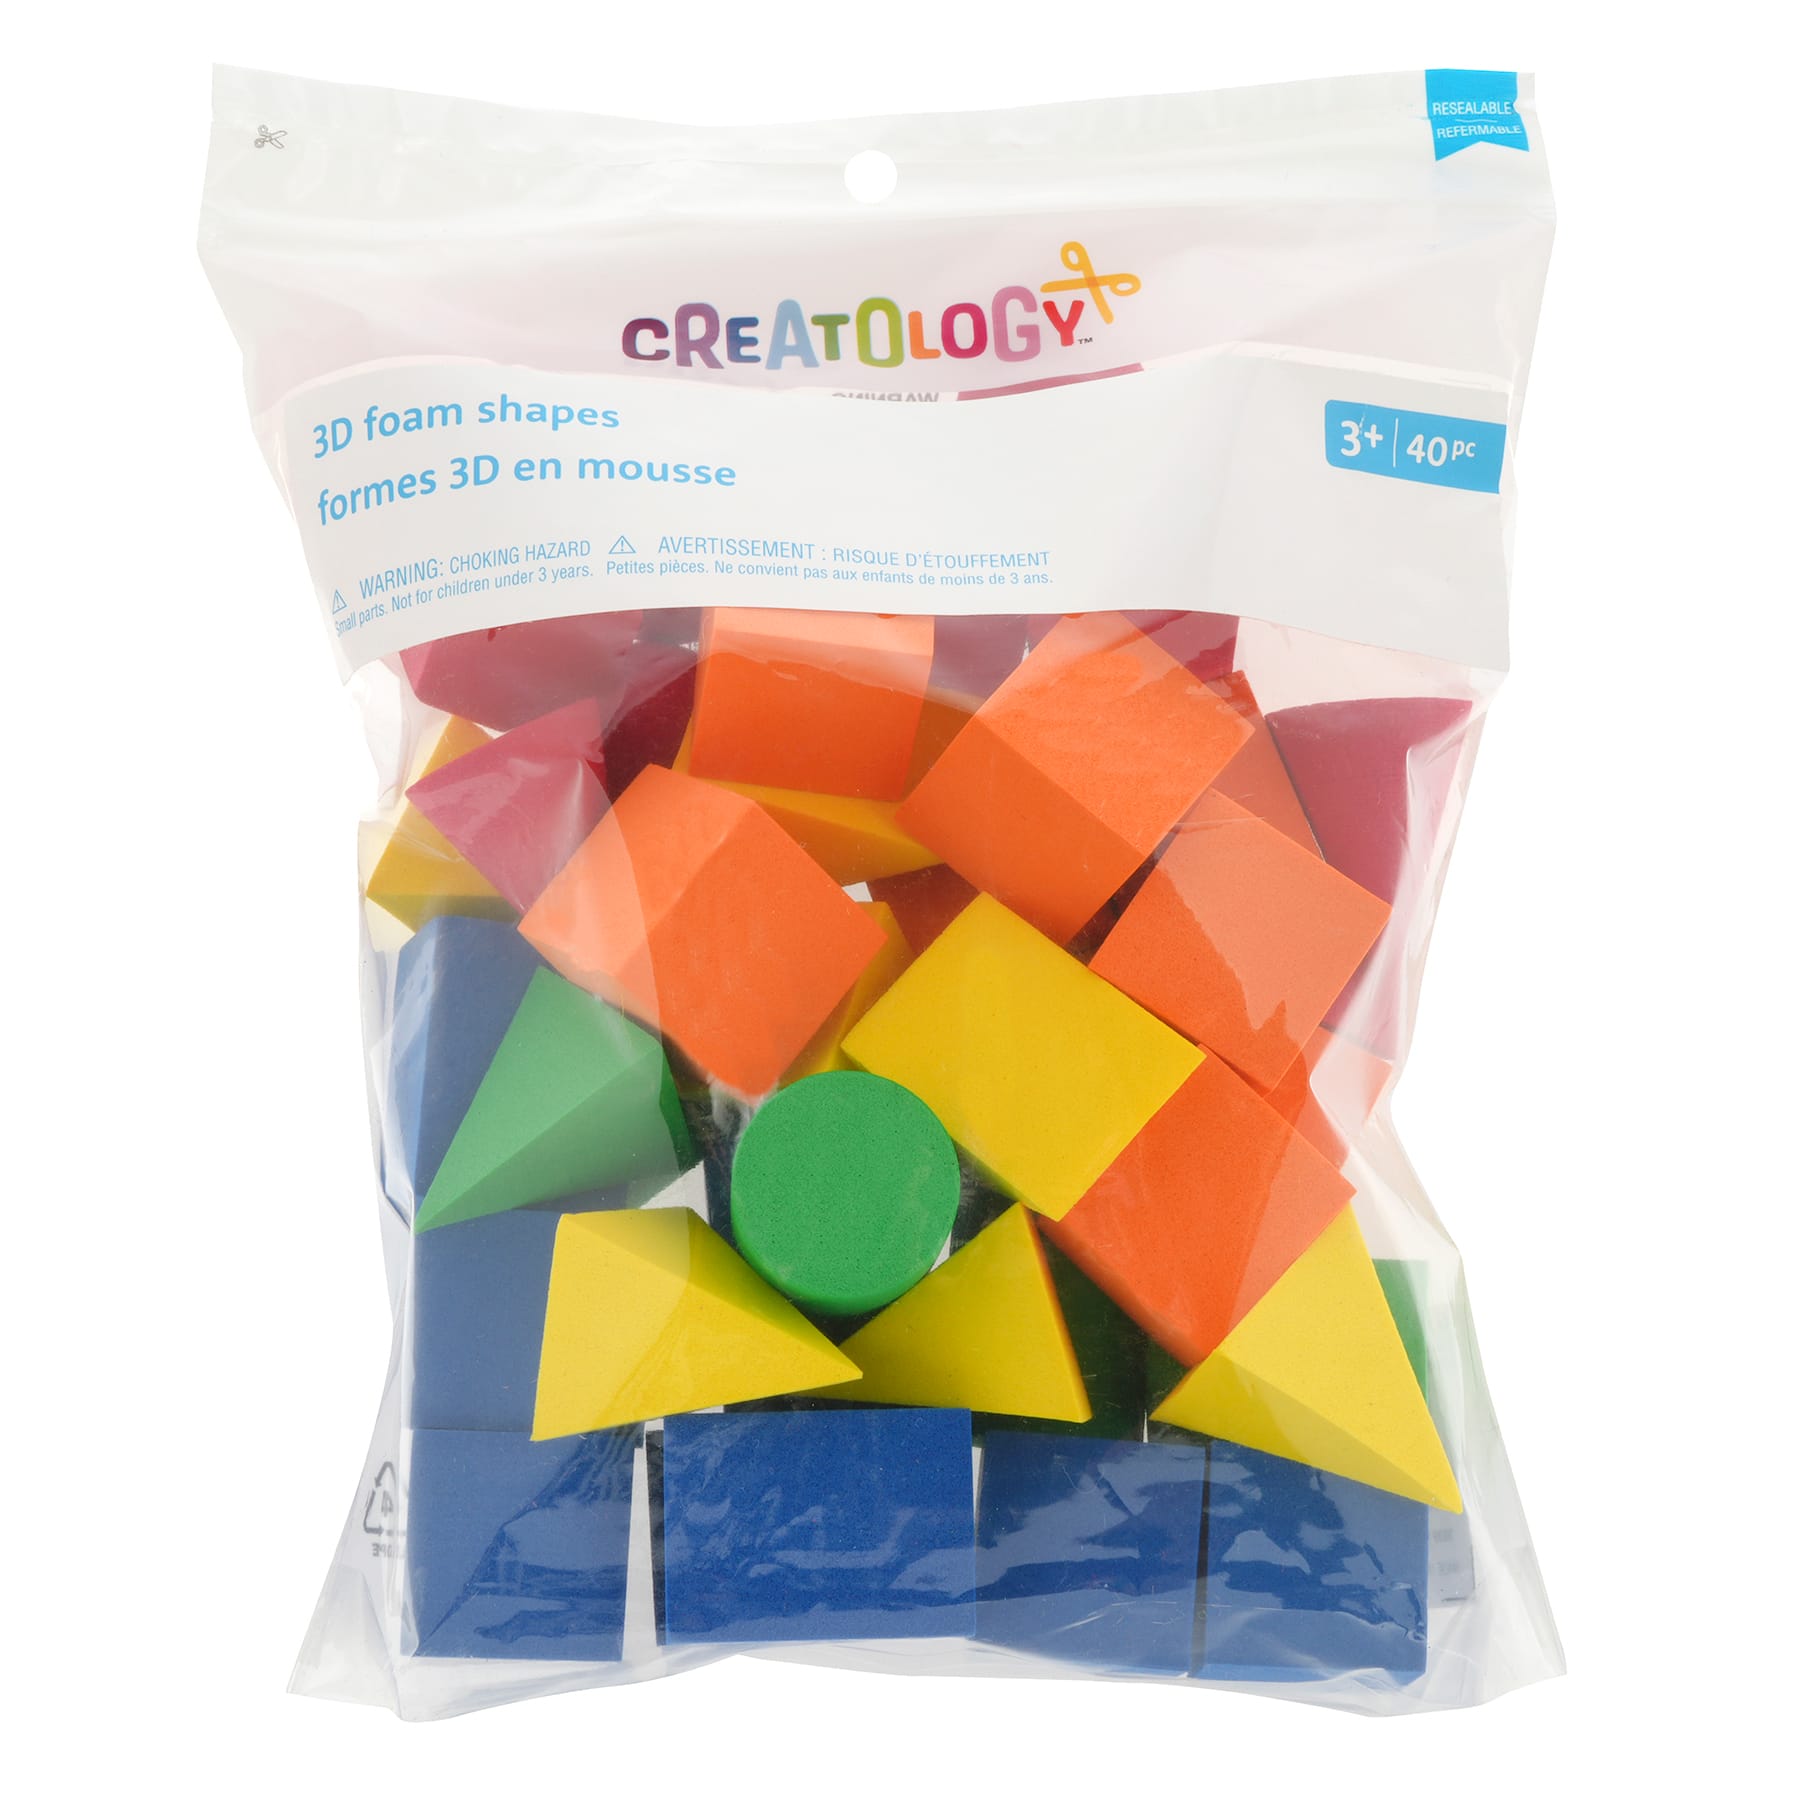 Creatology Primary 3D Foam Shapes - 1 Each